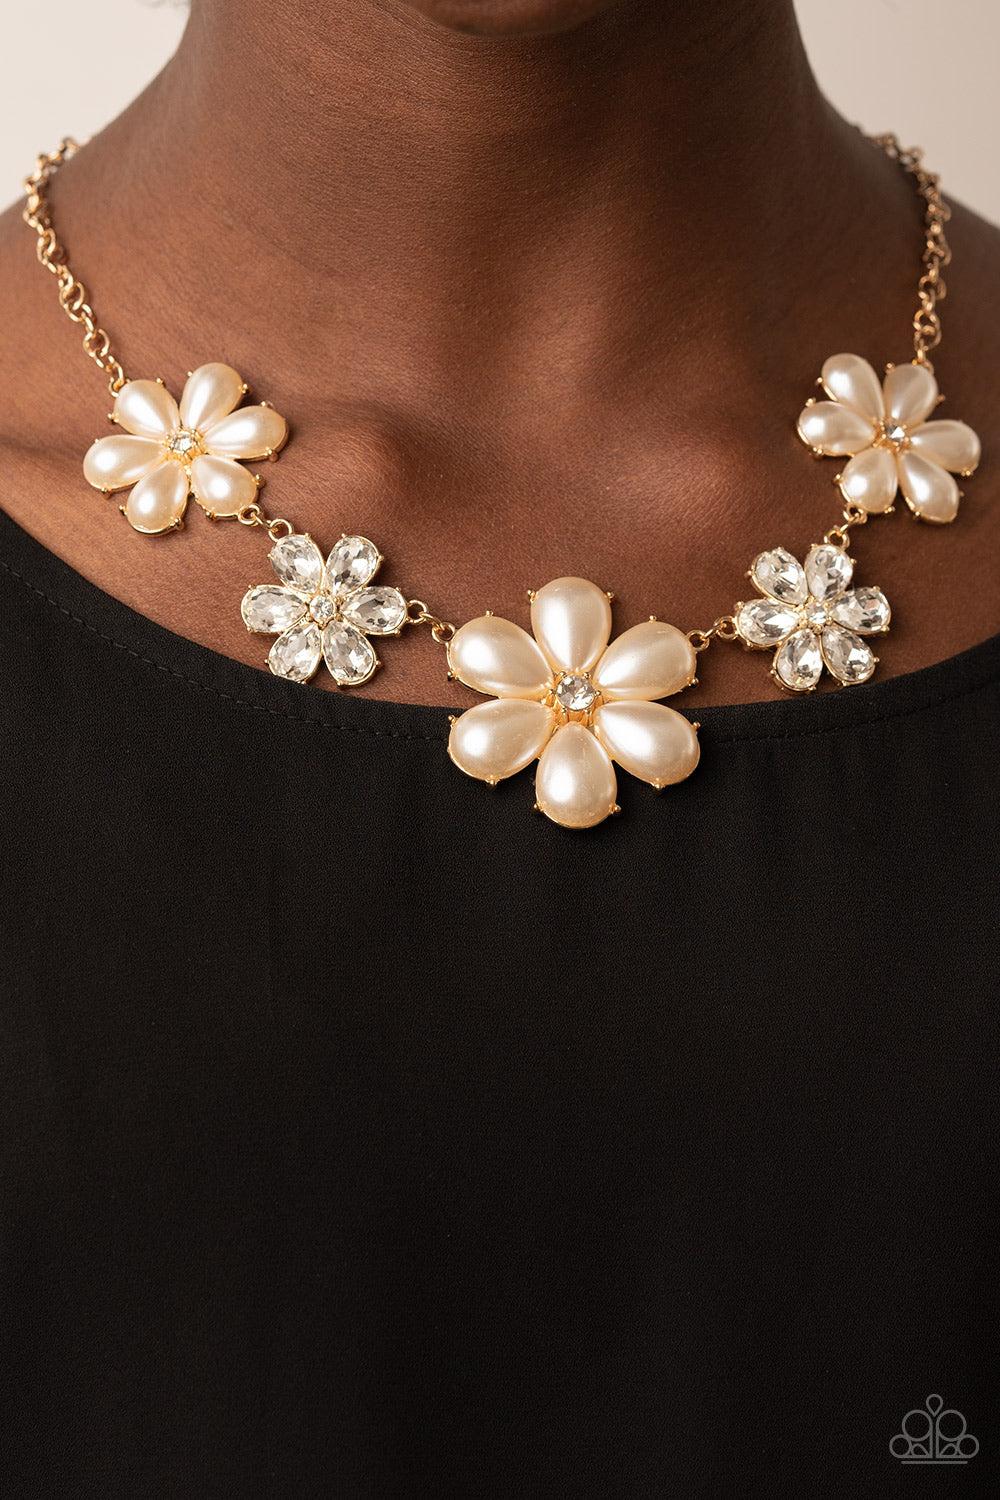 Fiercely Flowering - Gold Floral Necklaces featuring glassy white rhinestone centers, bubbly pearl petaled gold flowers gradually increase in size as they alternate with white rhinestone petaled flowers below the collar for a fierce floral fashion. Features an adjustable clasp closure.  Sold as one individual necklace. Includes one pair of matching earrings.